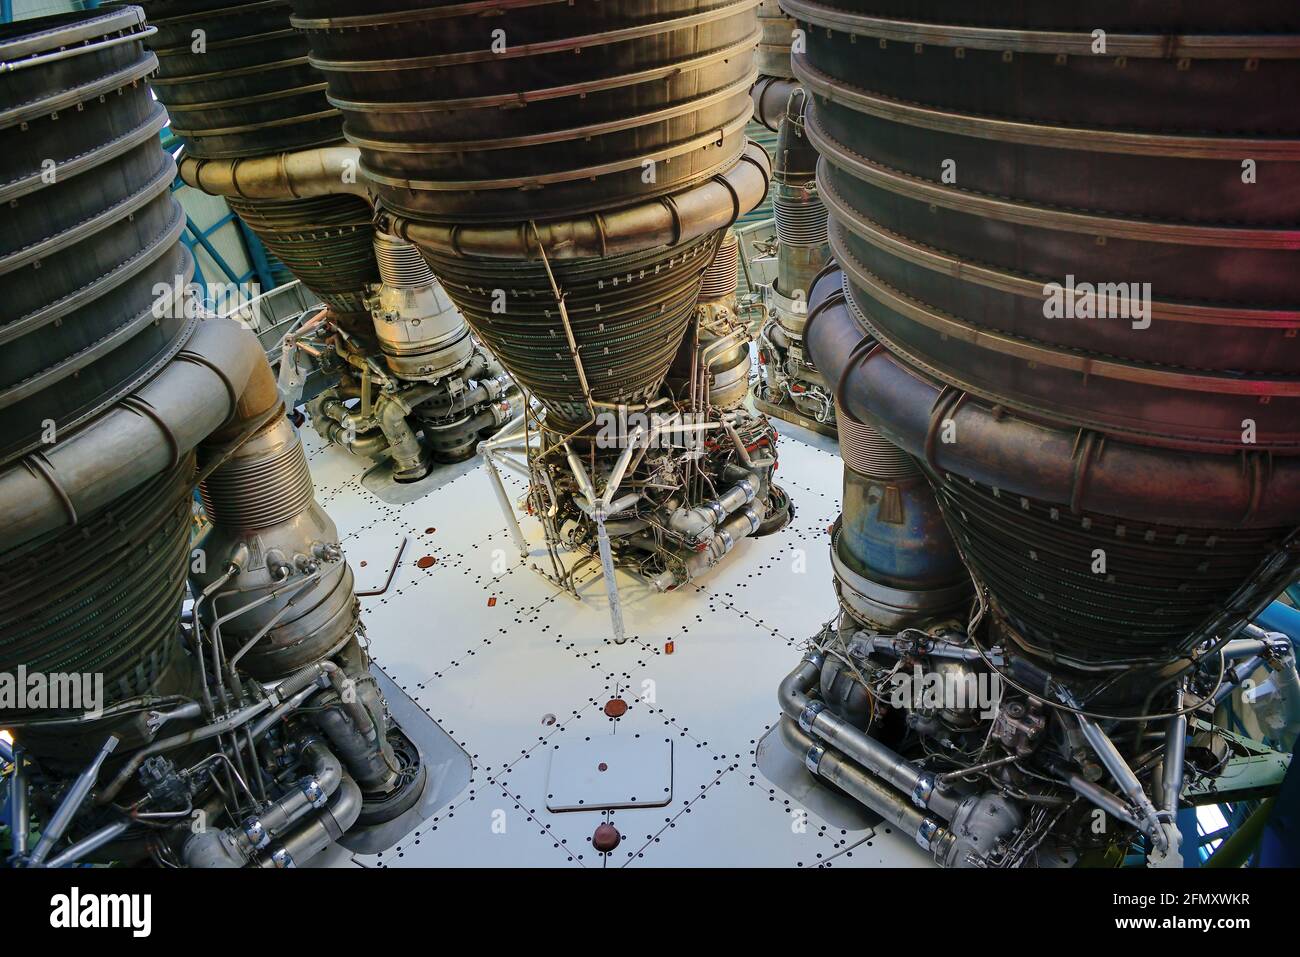 Saturn V Launch Vehicle Engines, Apollo/Saturn V Center, Kennedy Space Center, Florida Stockfoto